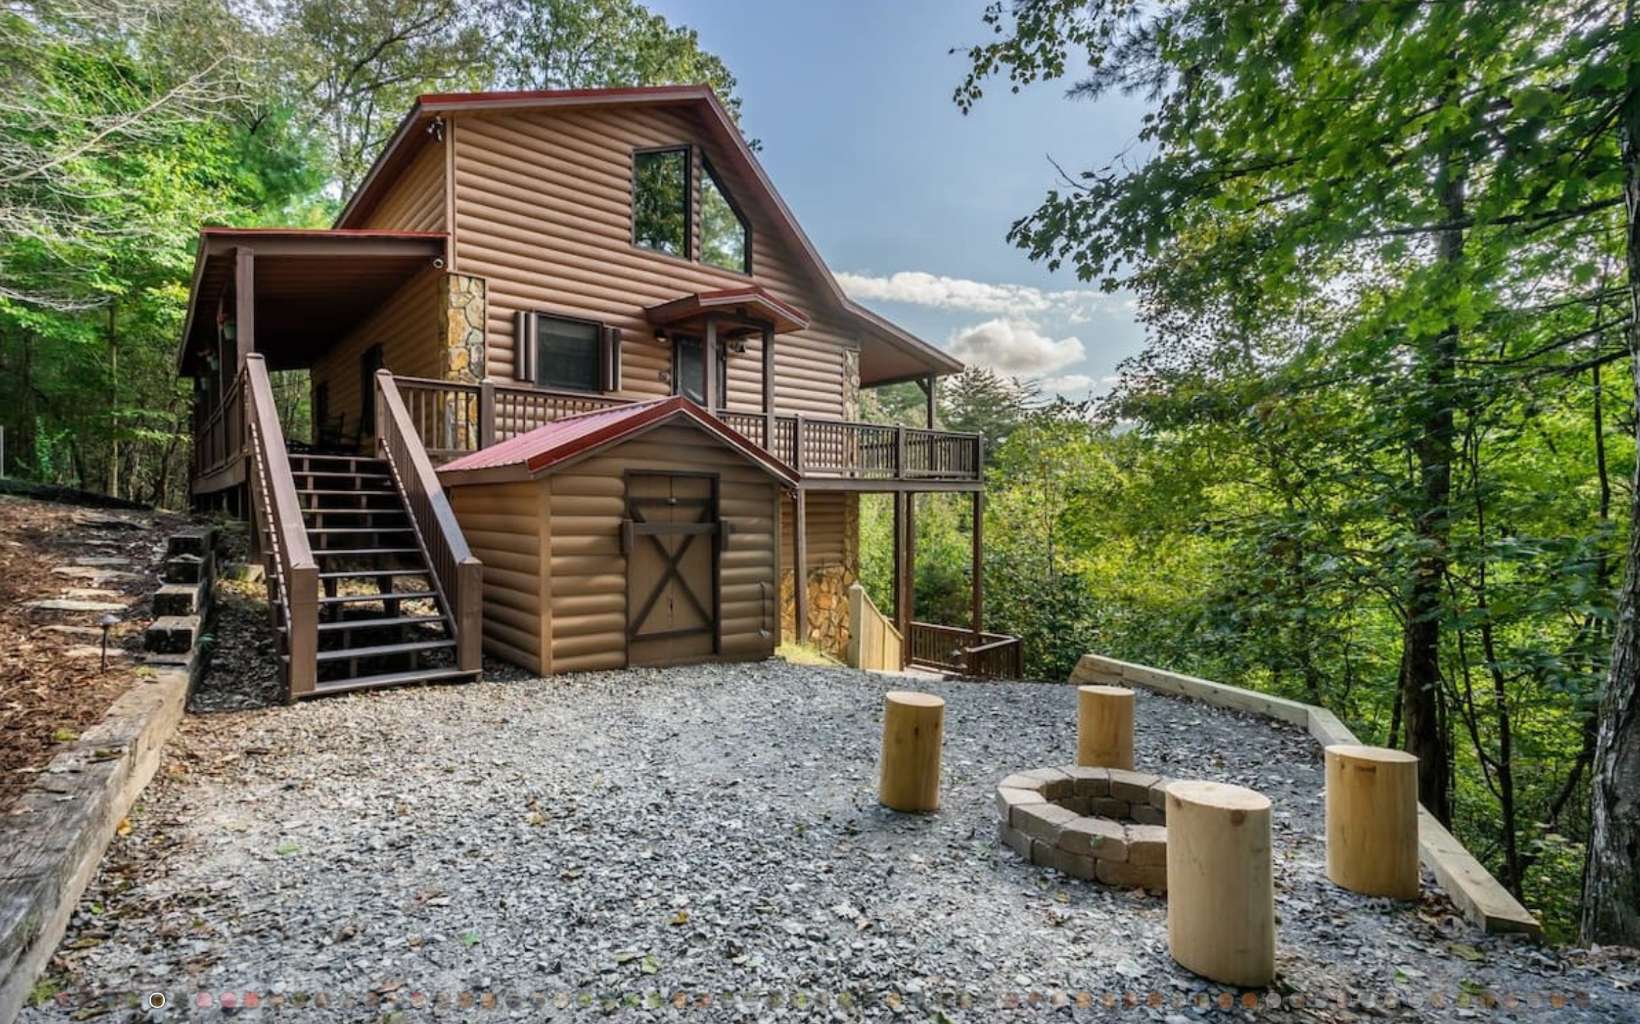 Spacious mountain retreat on 1.43 acres, only 2 miles from Downtown Blue Ridge. Private road with no HOA! Proven exceptional rental history. Cabin comes FULLY FURNISHED from top to bottom, and turn-key ready for the new owners to start renting! Enjoy long-range mountain views from three levels of covered porches spanning the length of the cabin and offering ultimate privacy for guests and couples. This is the perfect investment home, with 3 bedrooms + loft/ 3.5 bathrooms spanning over three levels. Main level with soaring ceilings, new furnishings, push-button gas stone fireplace, oversized Smart TVs, new granite countertops in kitchen, king bedroom with ensuite bath, and half bath off living room. Upper level king bedroom with ensuite bath and private balcony. Terrace level queen bedroom w/ bathroom, laundry, and rec room opening out to a luxurious hot tub. Don't miss out!